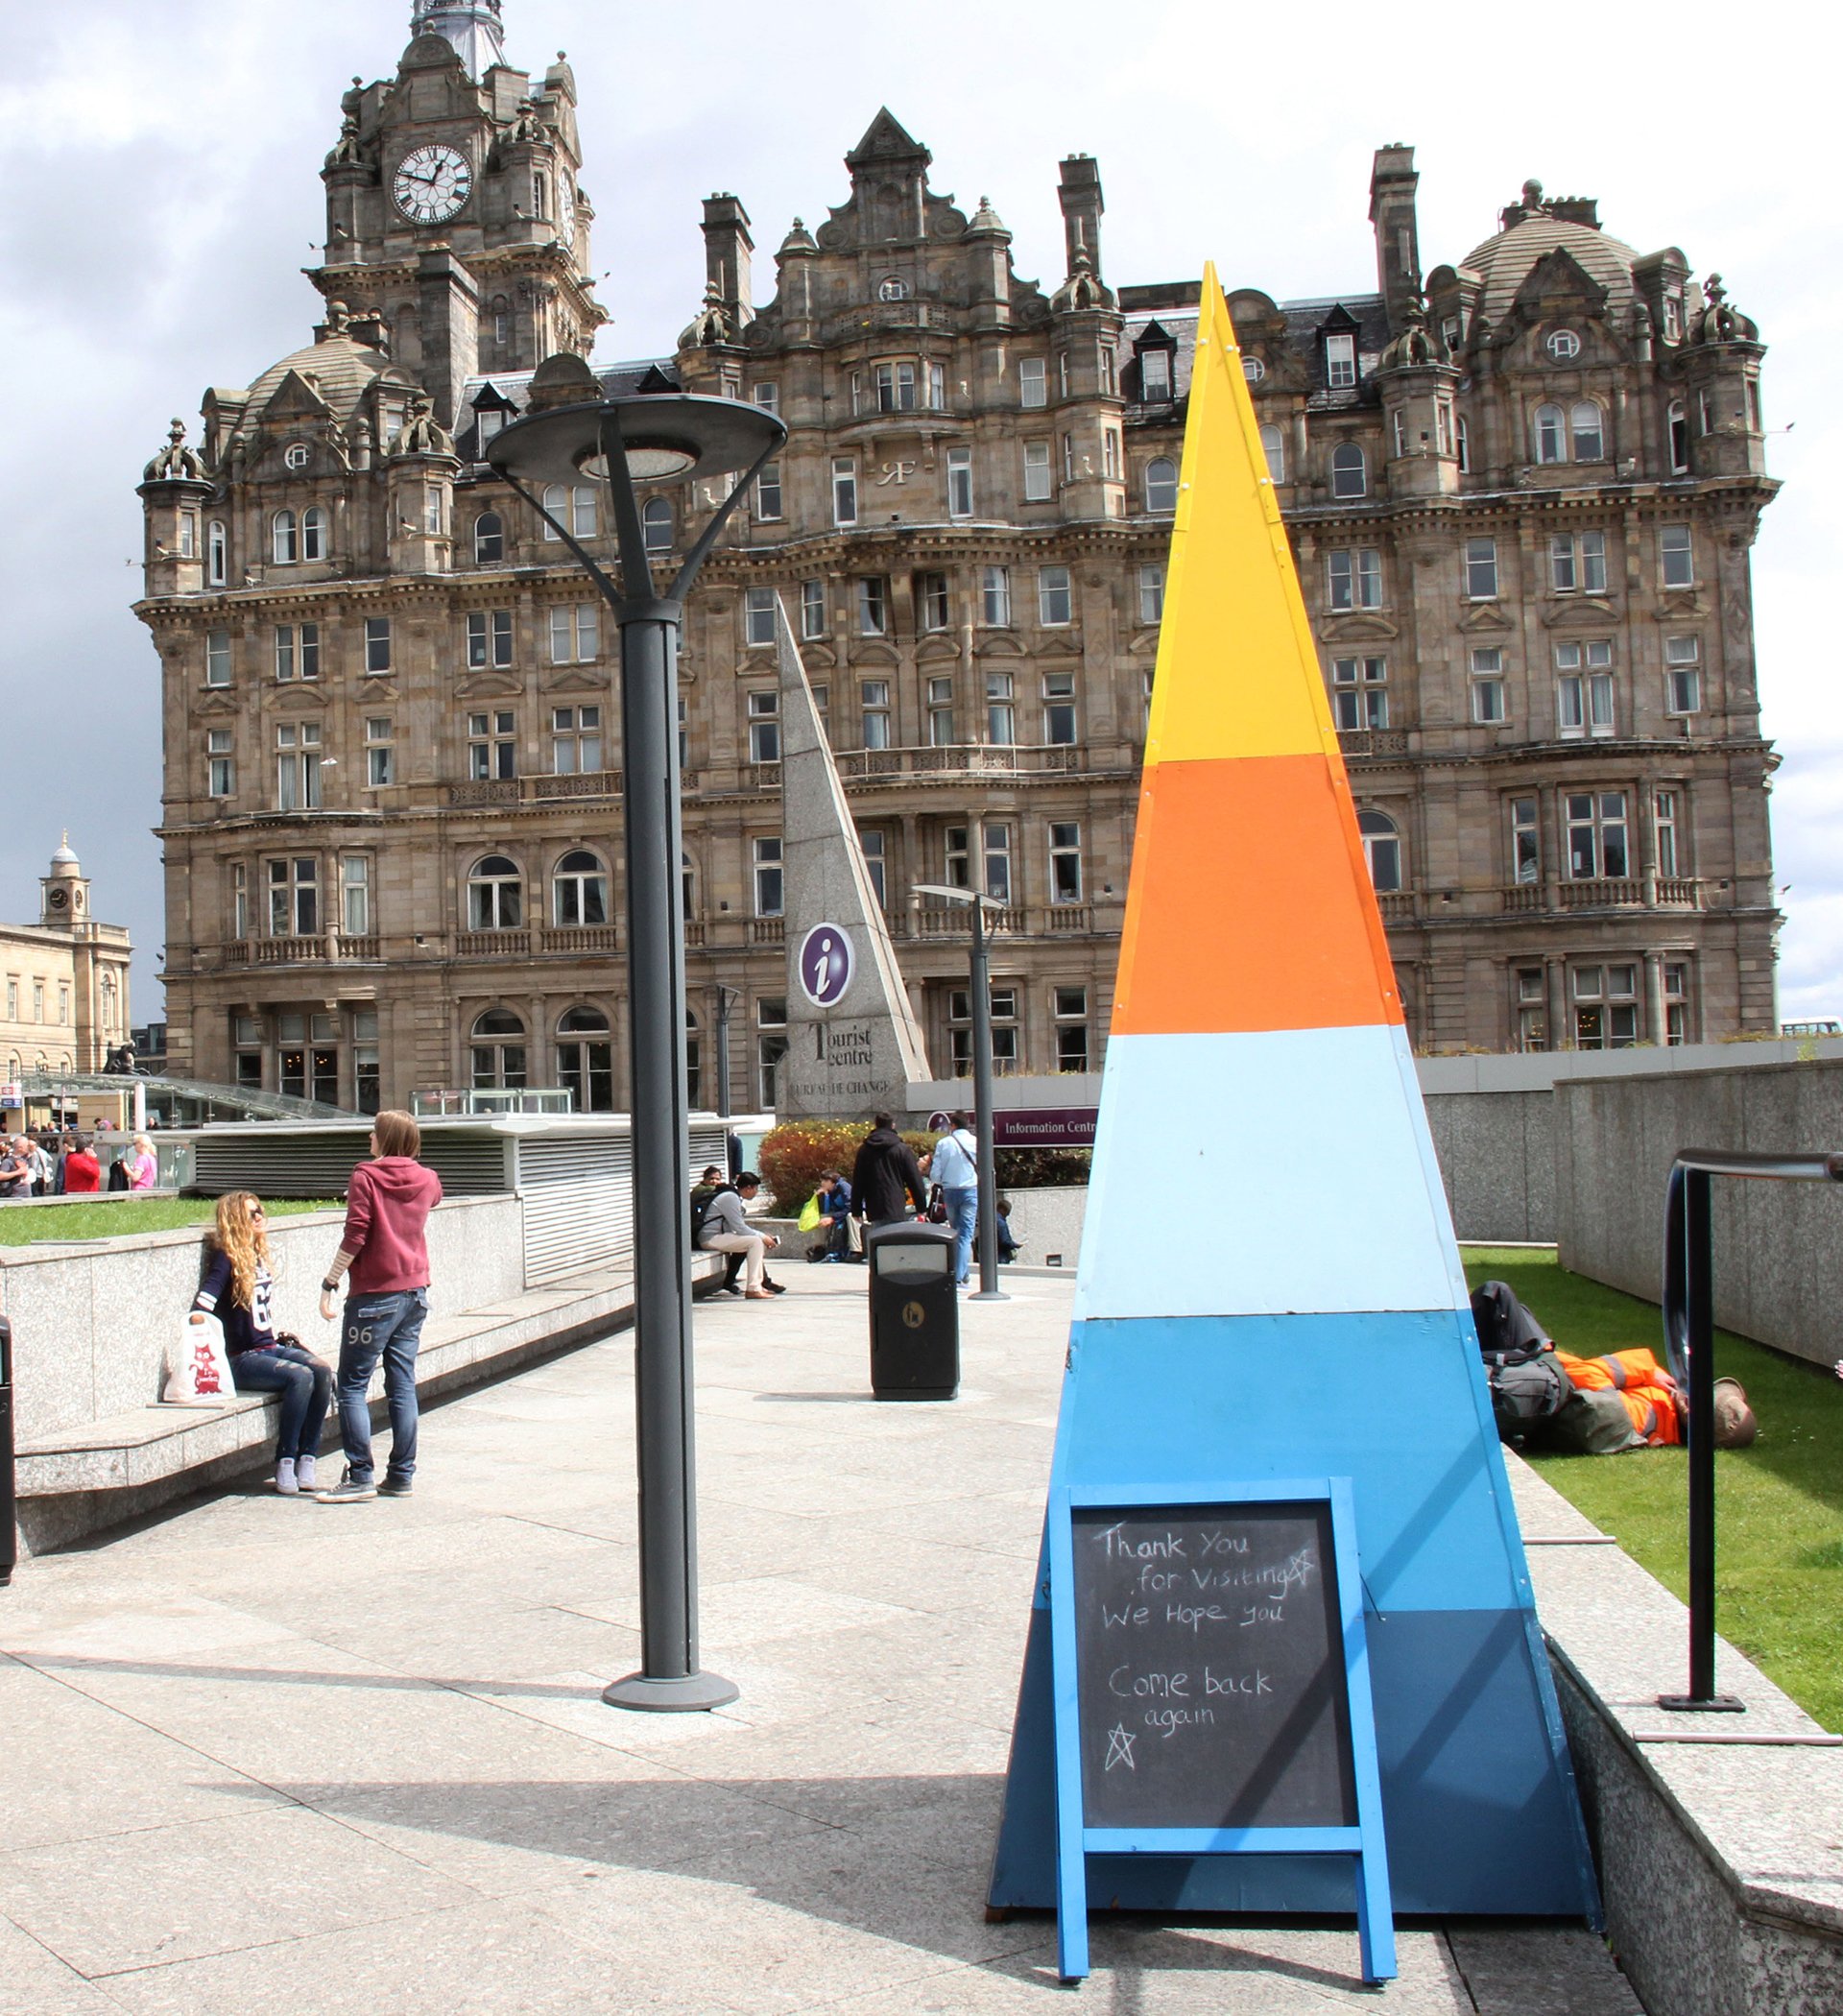 BoxSmall wooden pyramid structure painted with bright colours